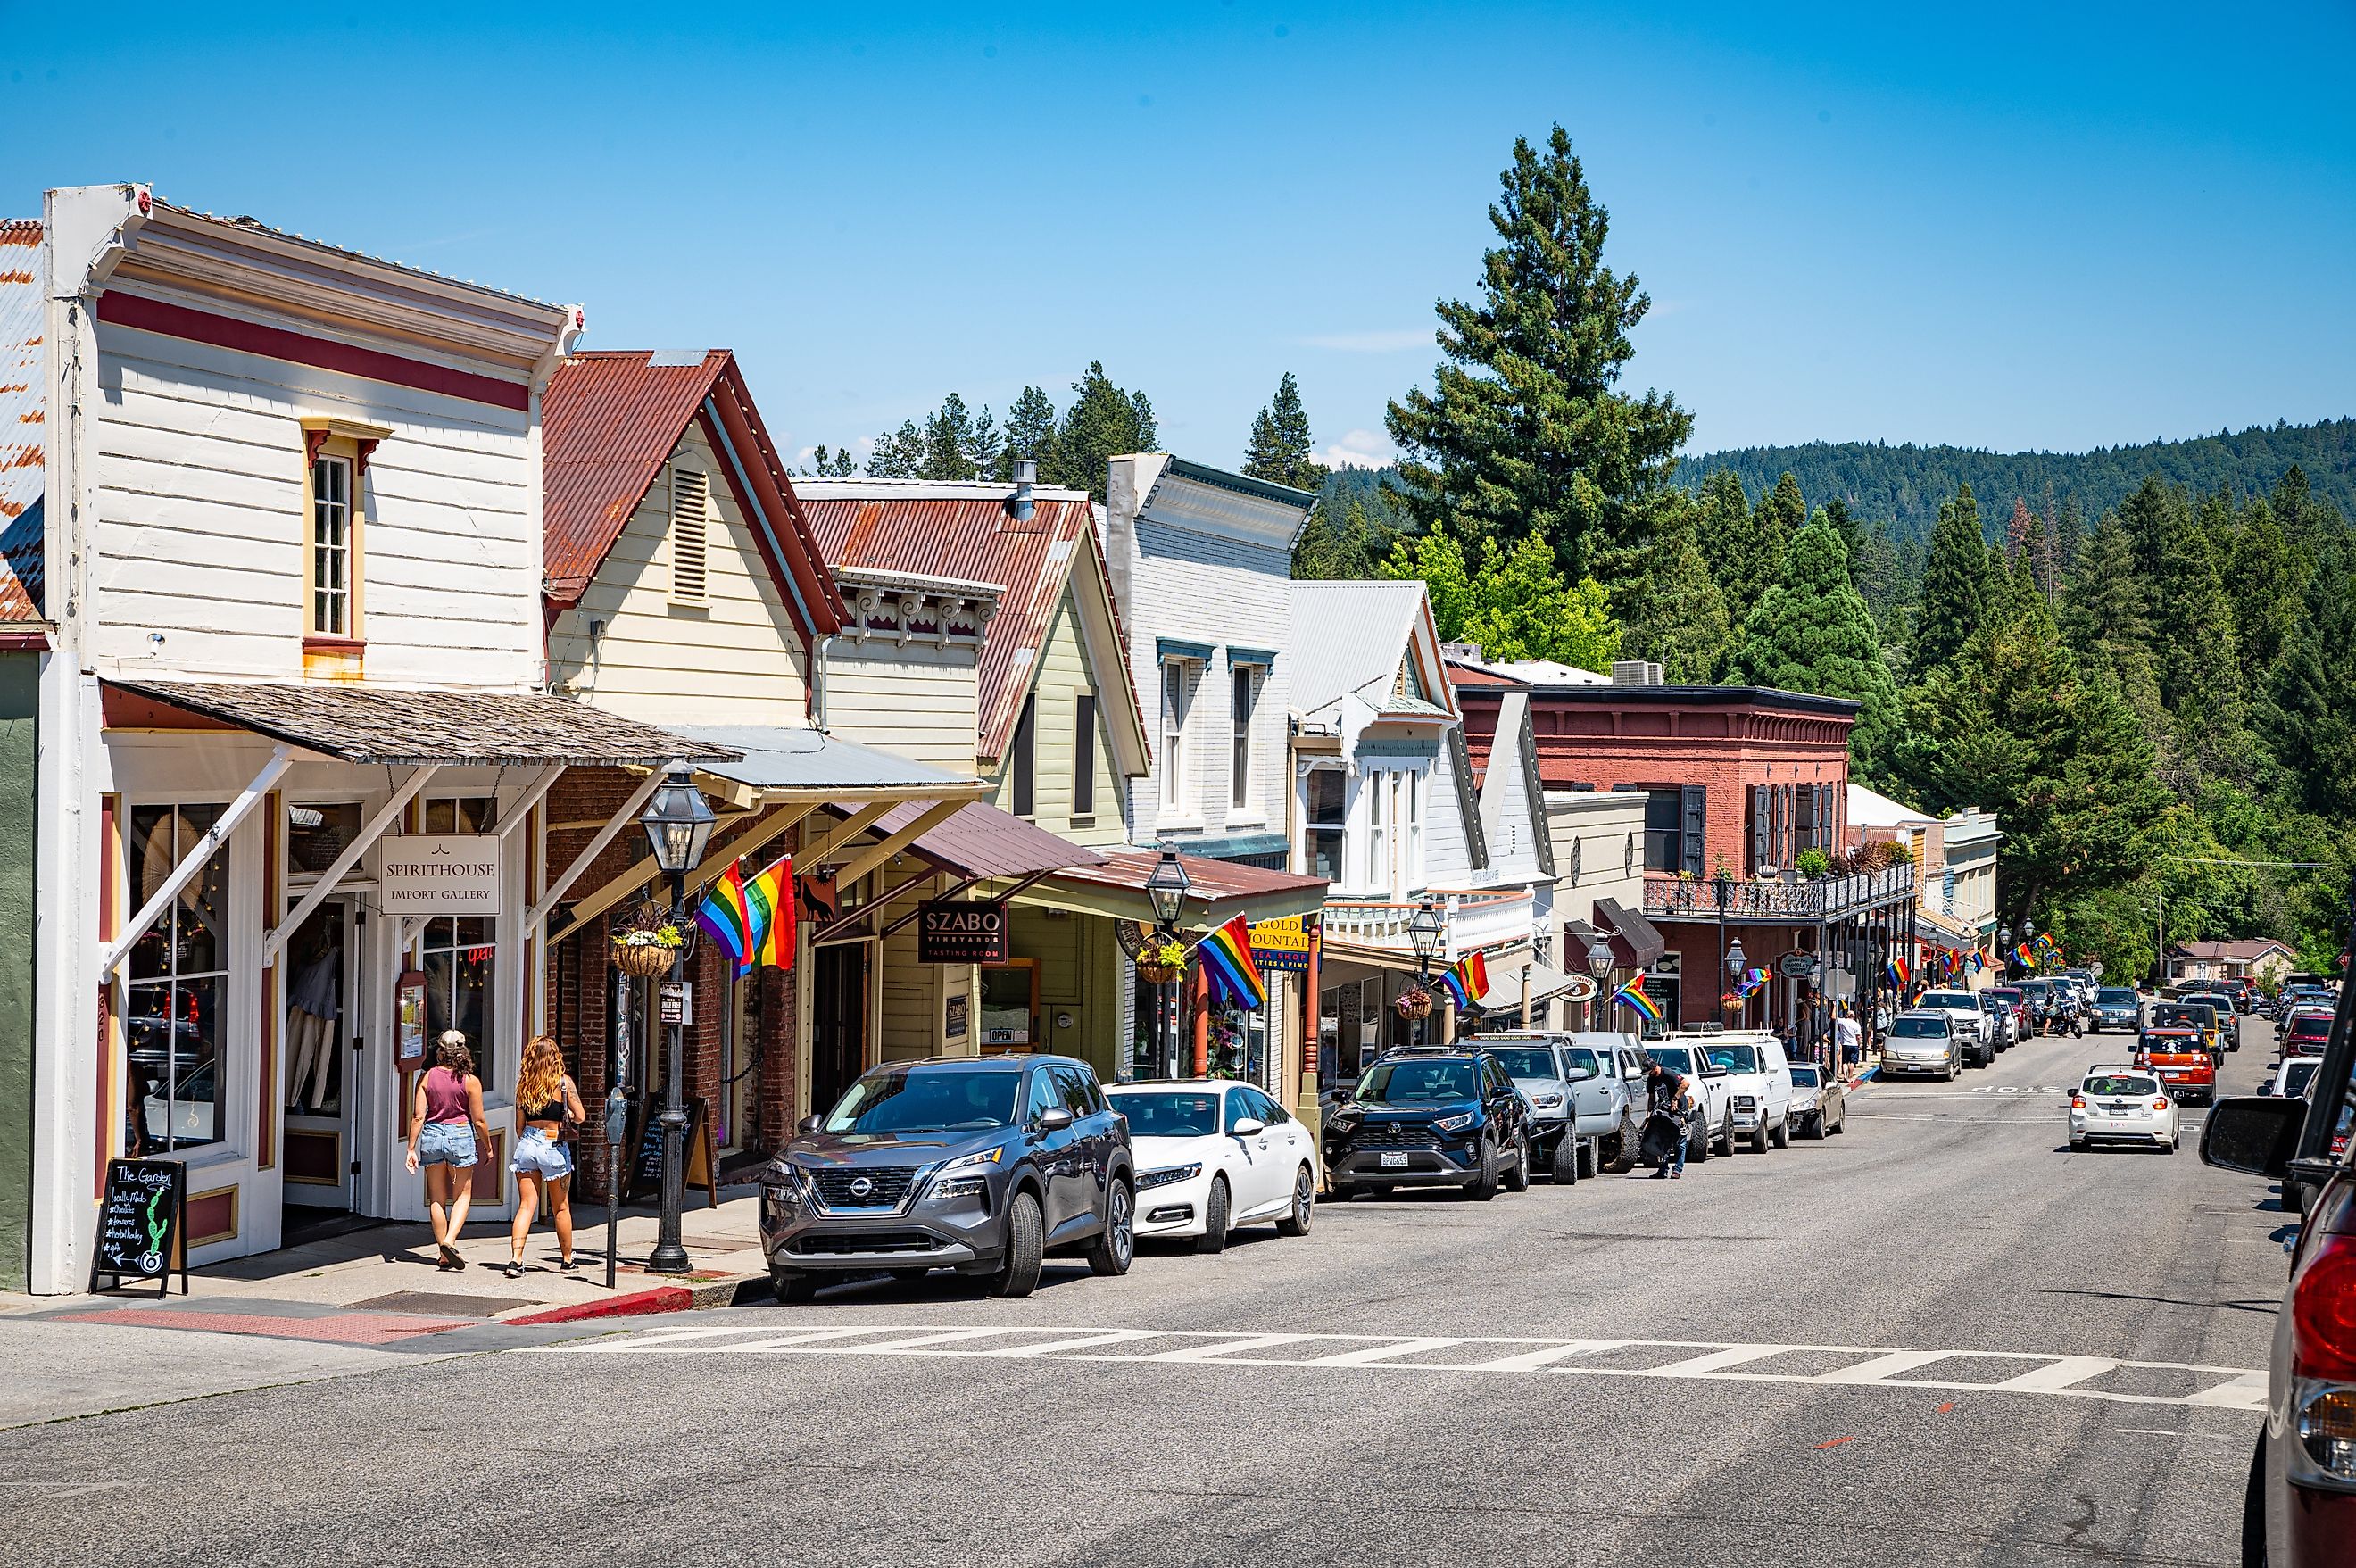 Broad Street in Nevada City, California, adorned with rainbow flags for Pride Month celebrations, featuring local shops and eateries. Editorial credit: Chris Allan / Shutterstock.com